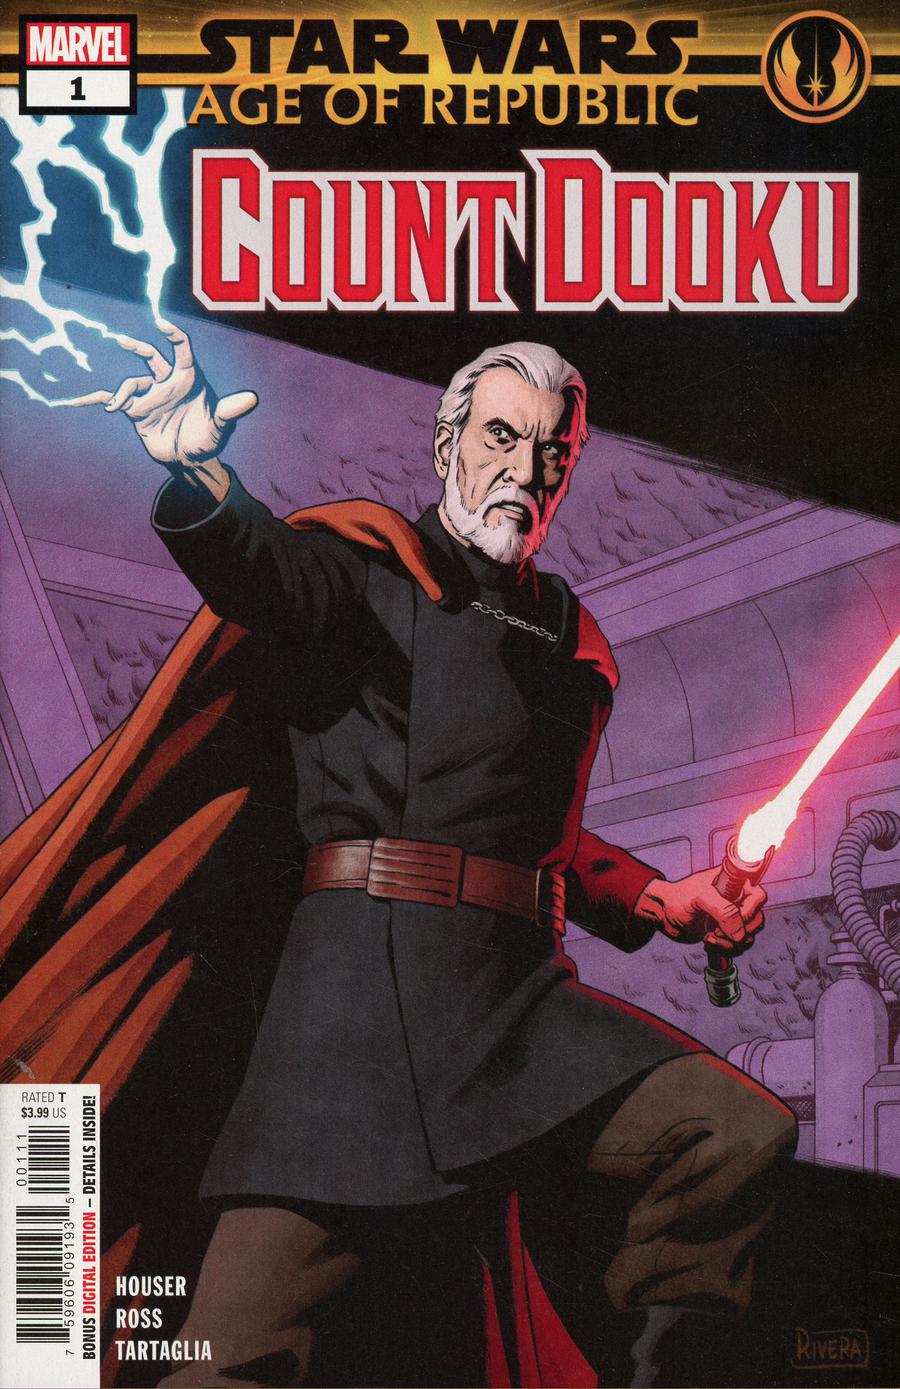 Star Wars Age of Republic: Count Dooku #1 [2019]